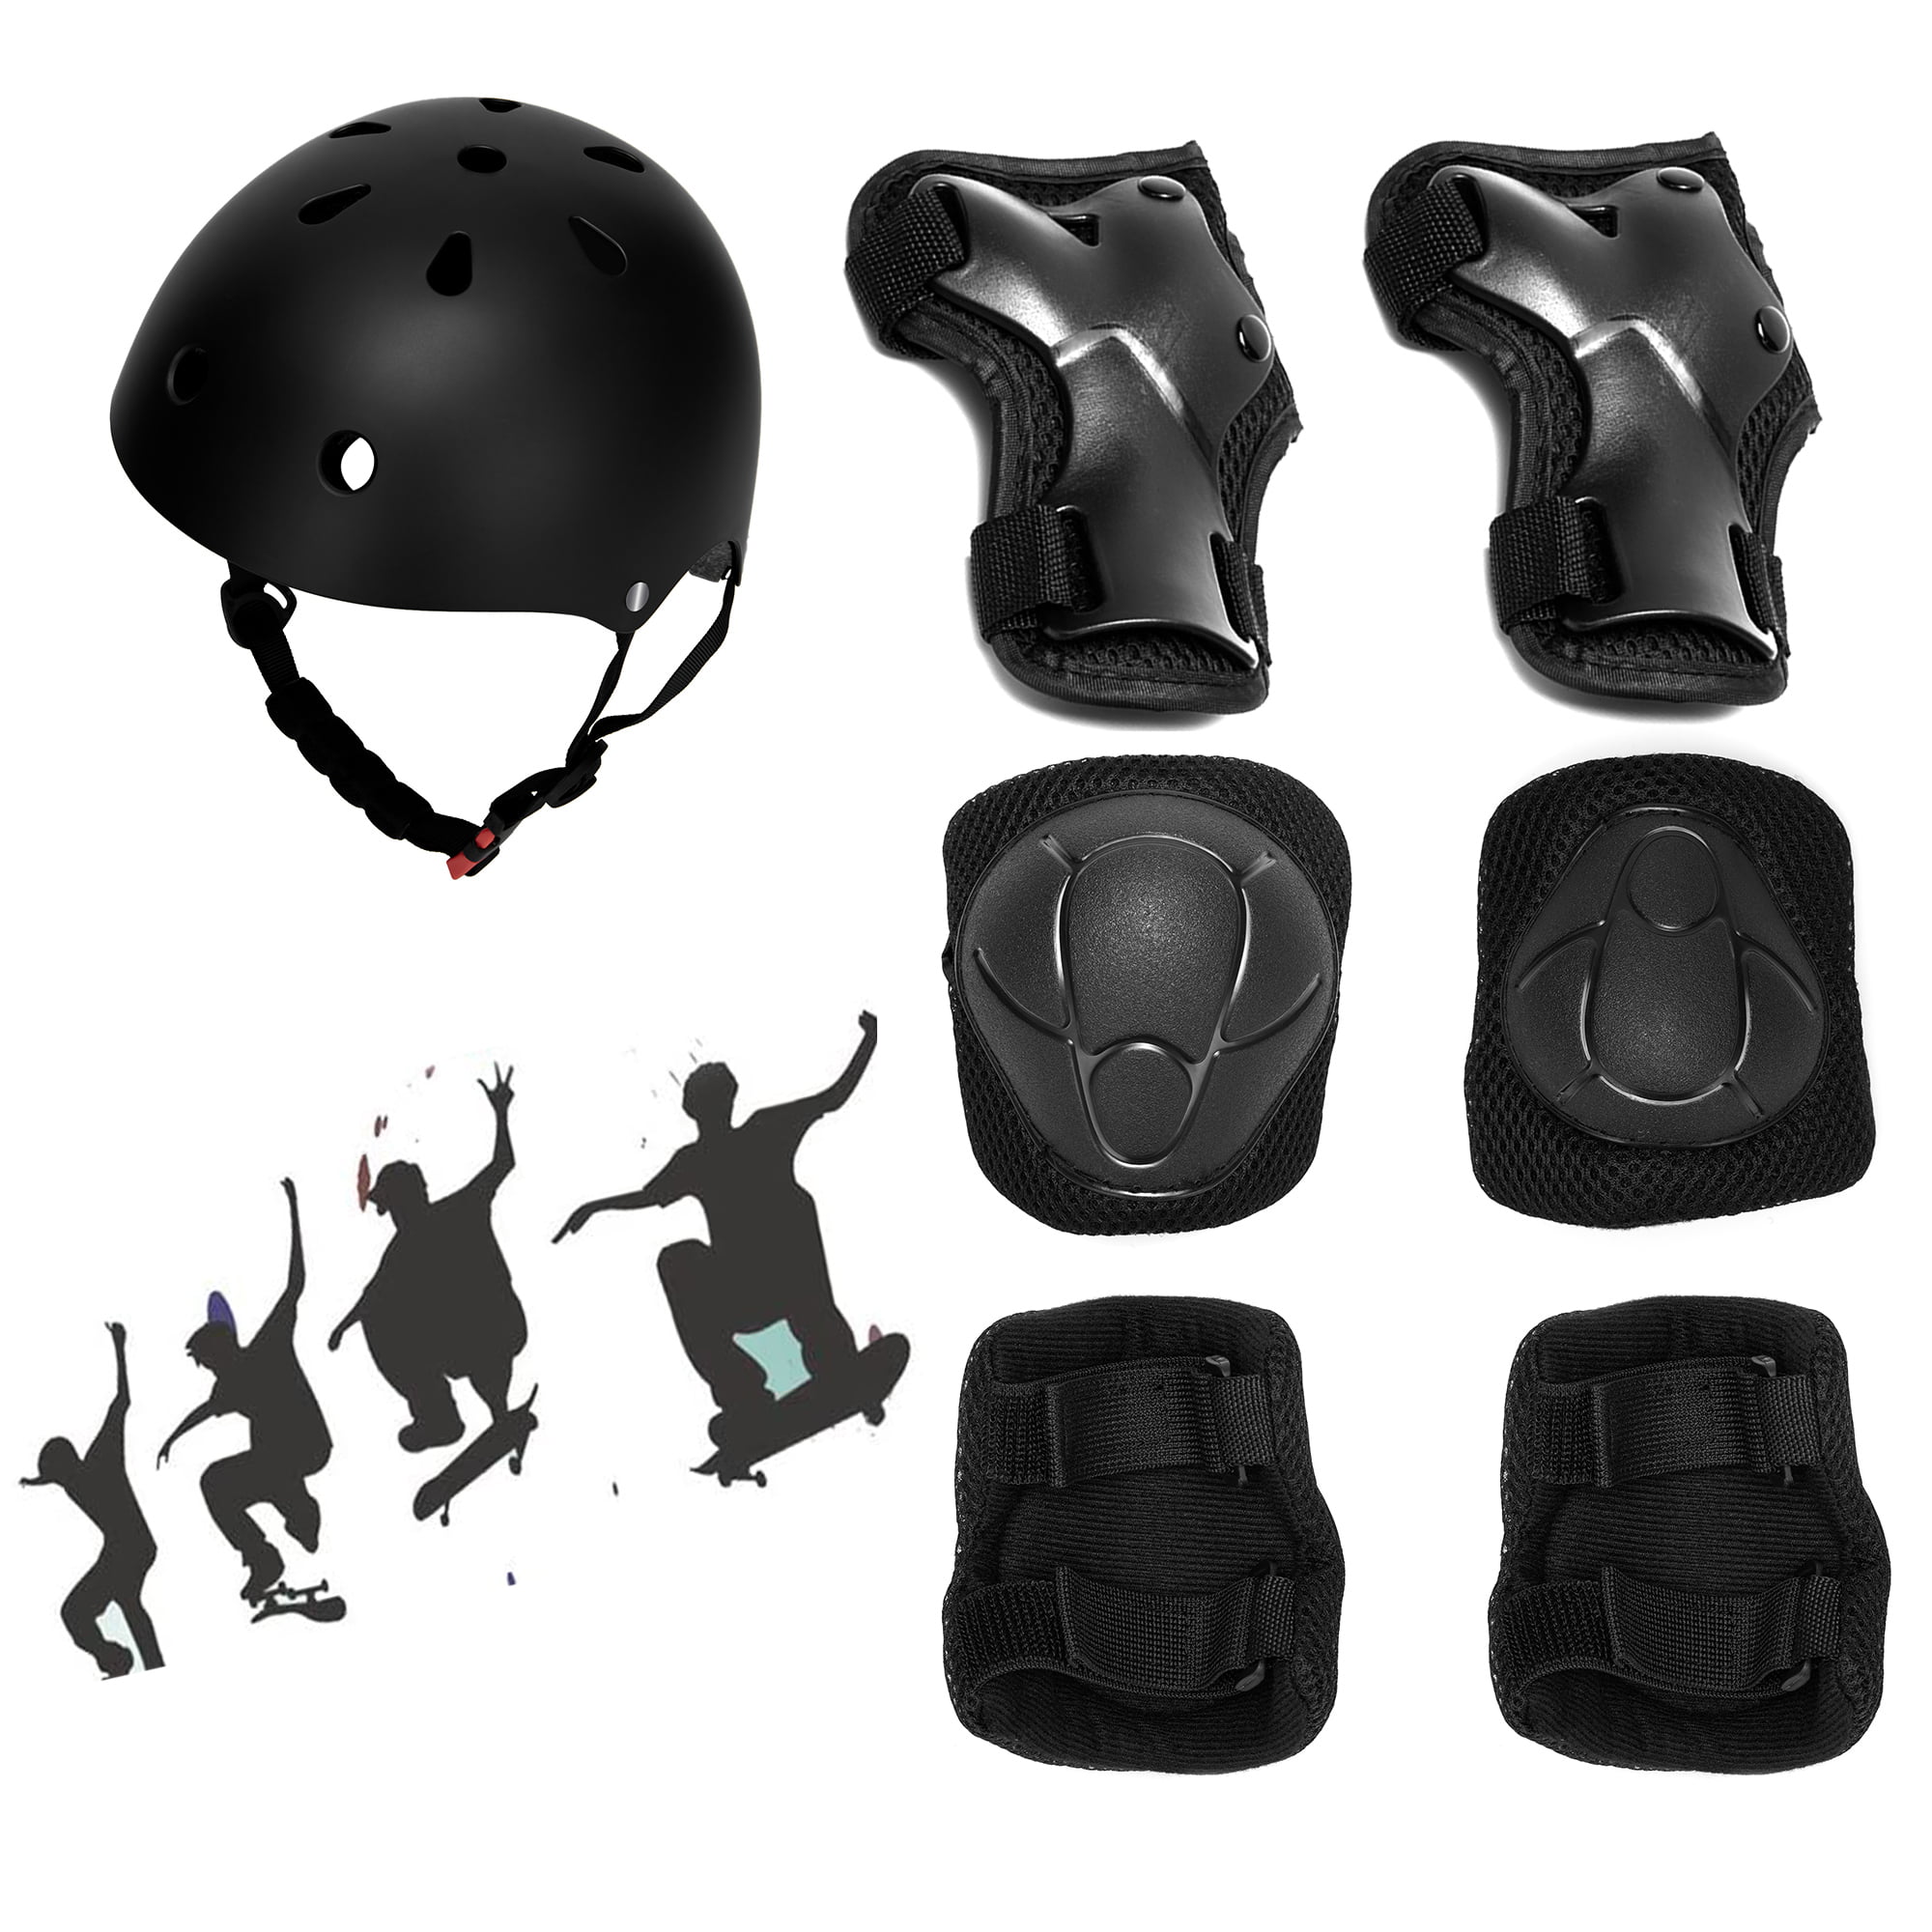 Kid Helmet For Skate Cycling Kids Protective Gear Sets Knee Elbow Pad Set 